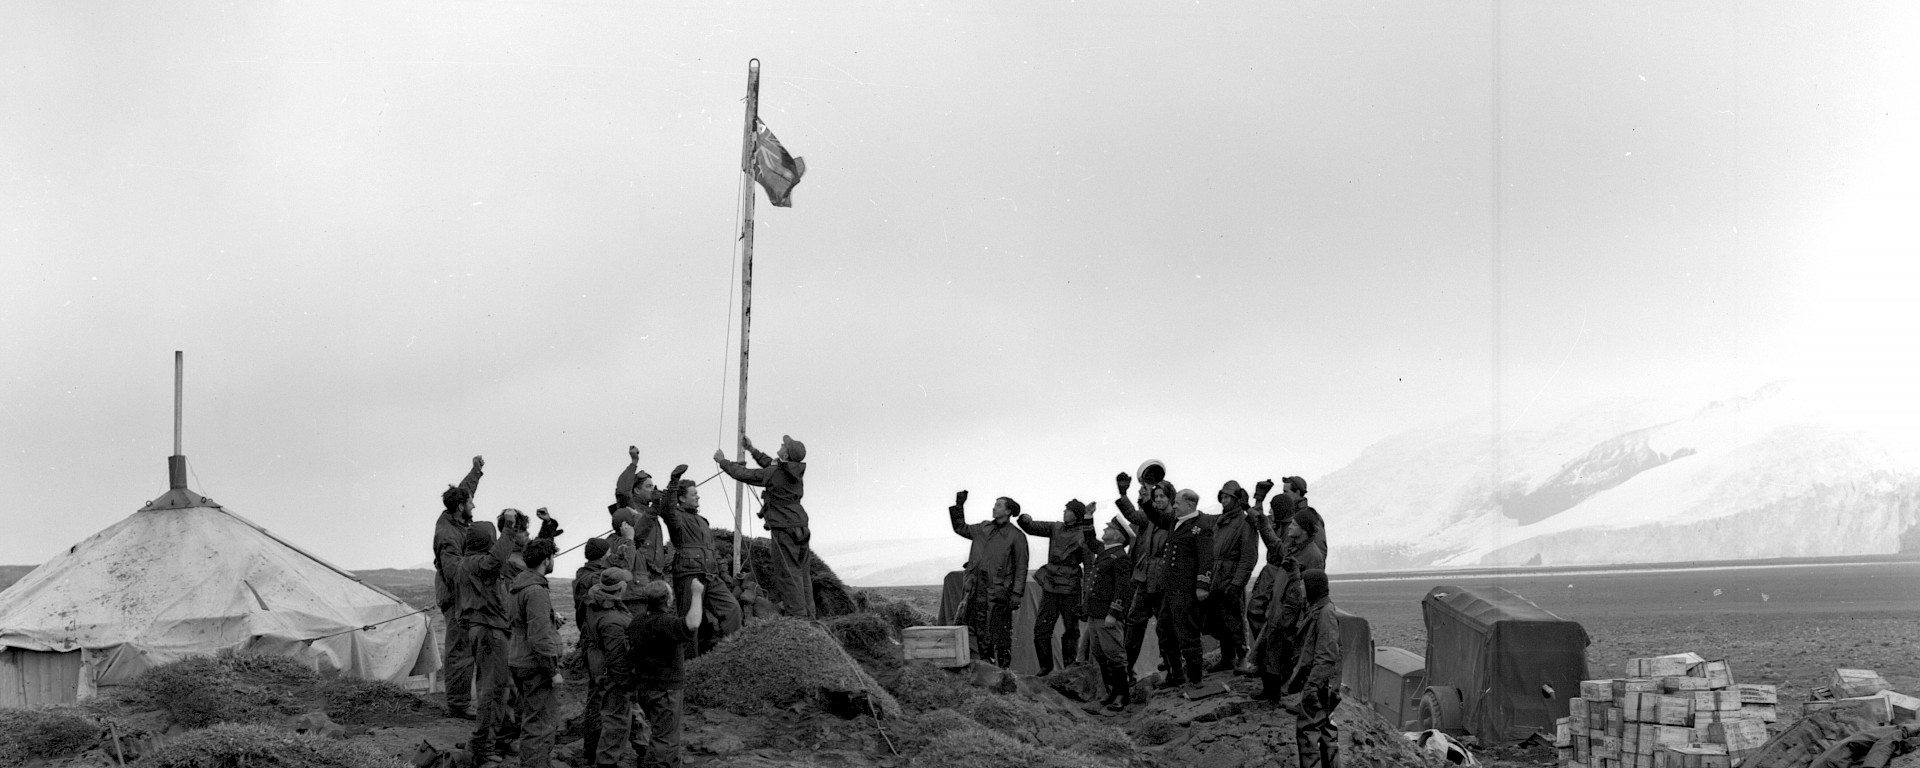 Black and white image of expedition leader raising flag surrounded by cheering men